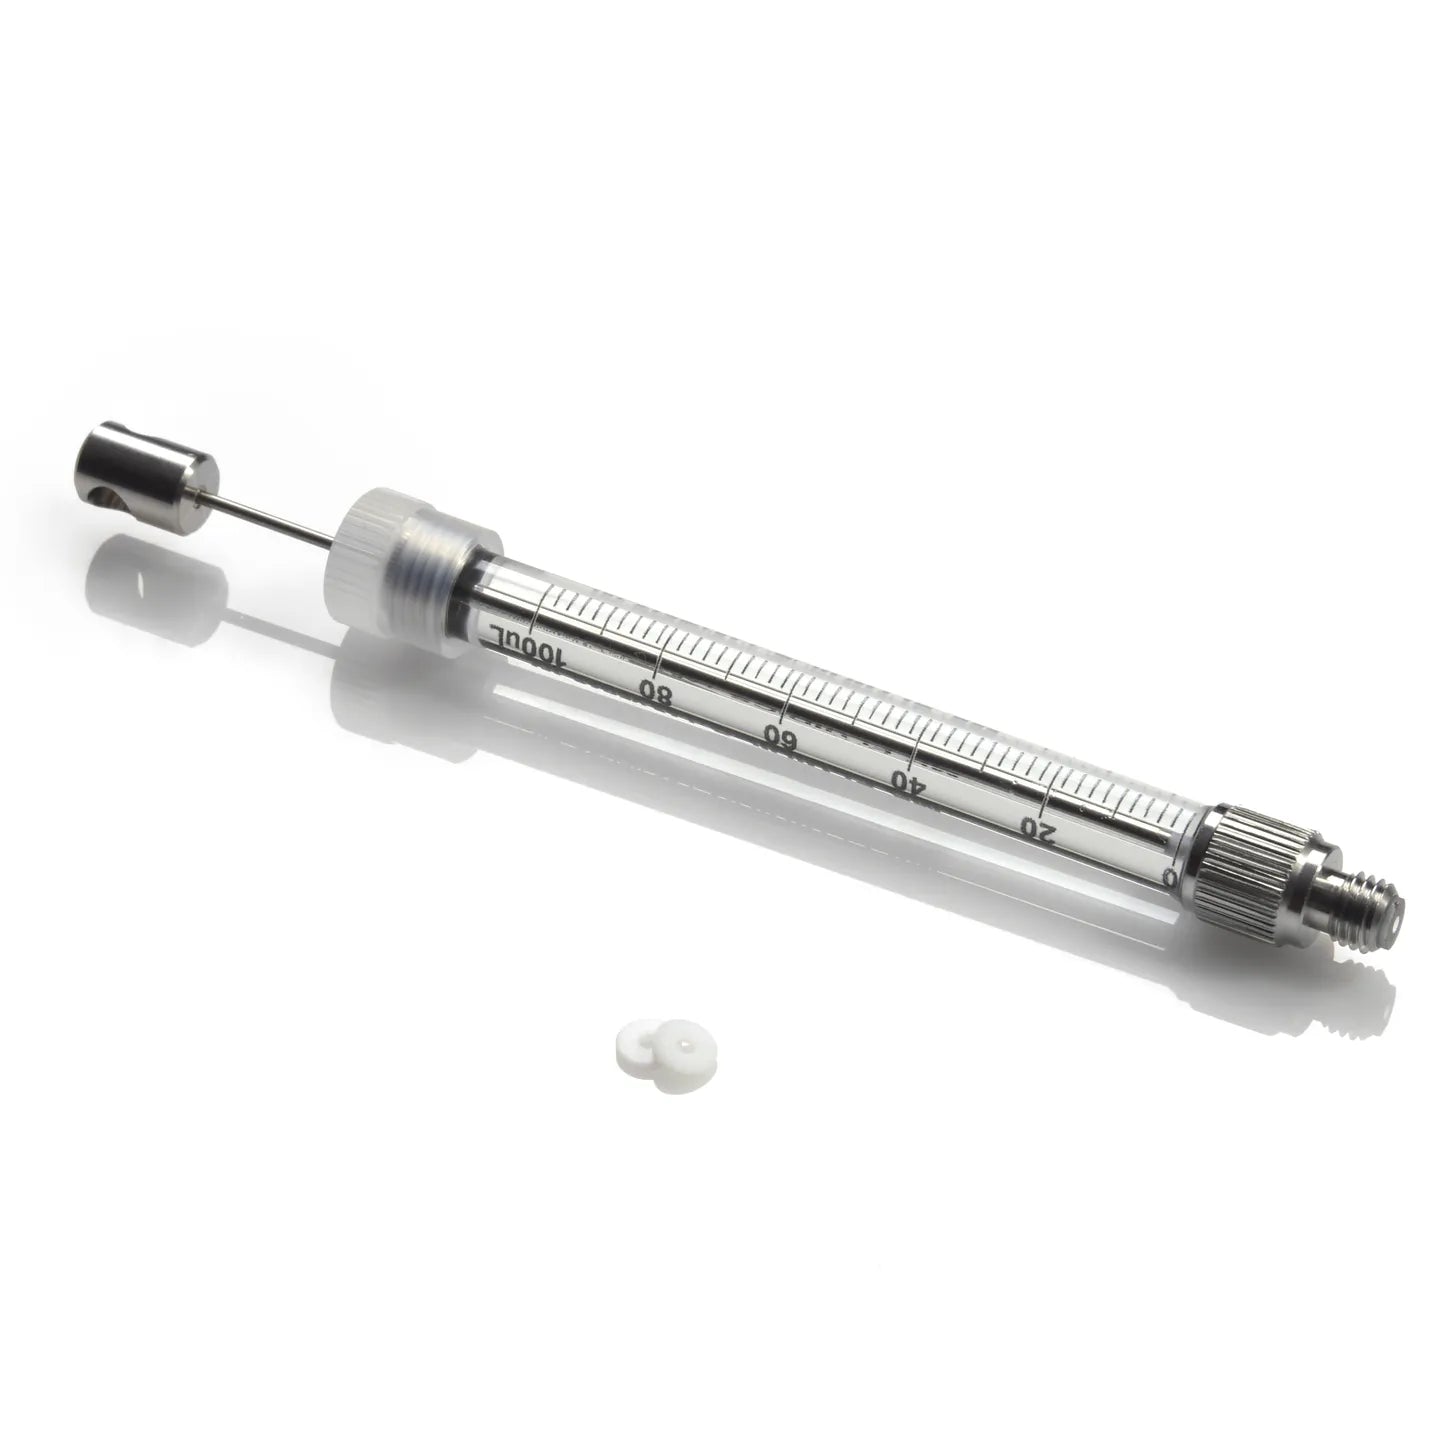 100µL Syringe for WPS-3000 Series, Comparable to Dionex # 6822.0002